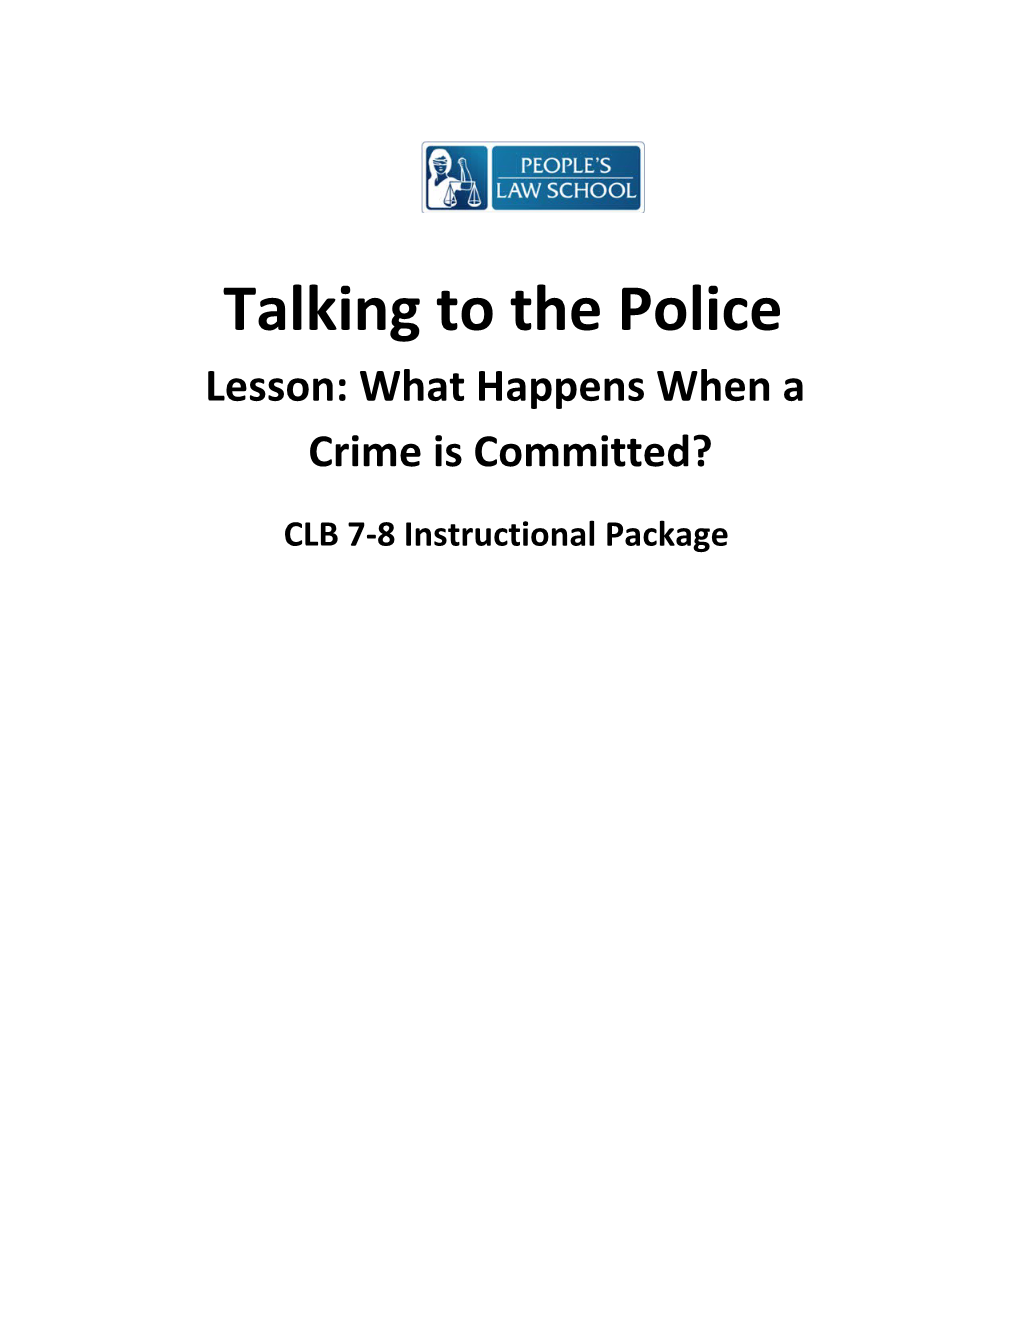 Talking to the Police Lesson: What Happens When a Crime Is Committed?